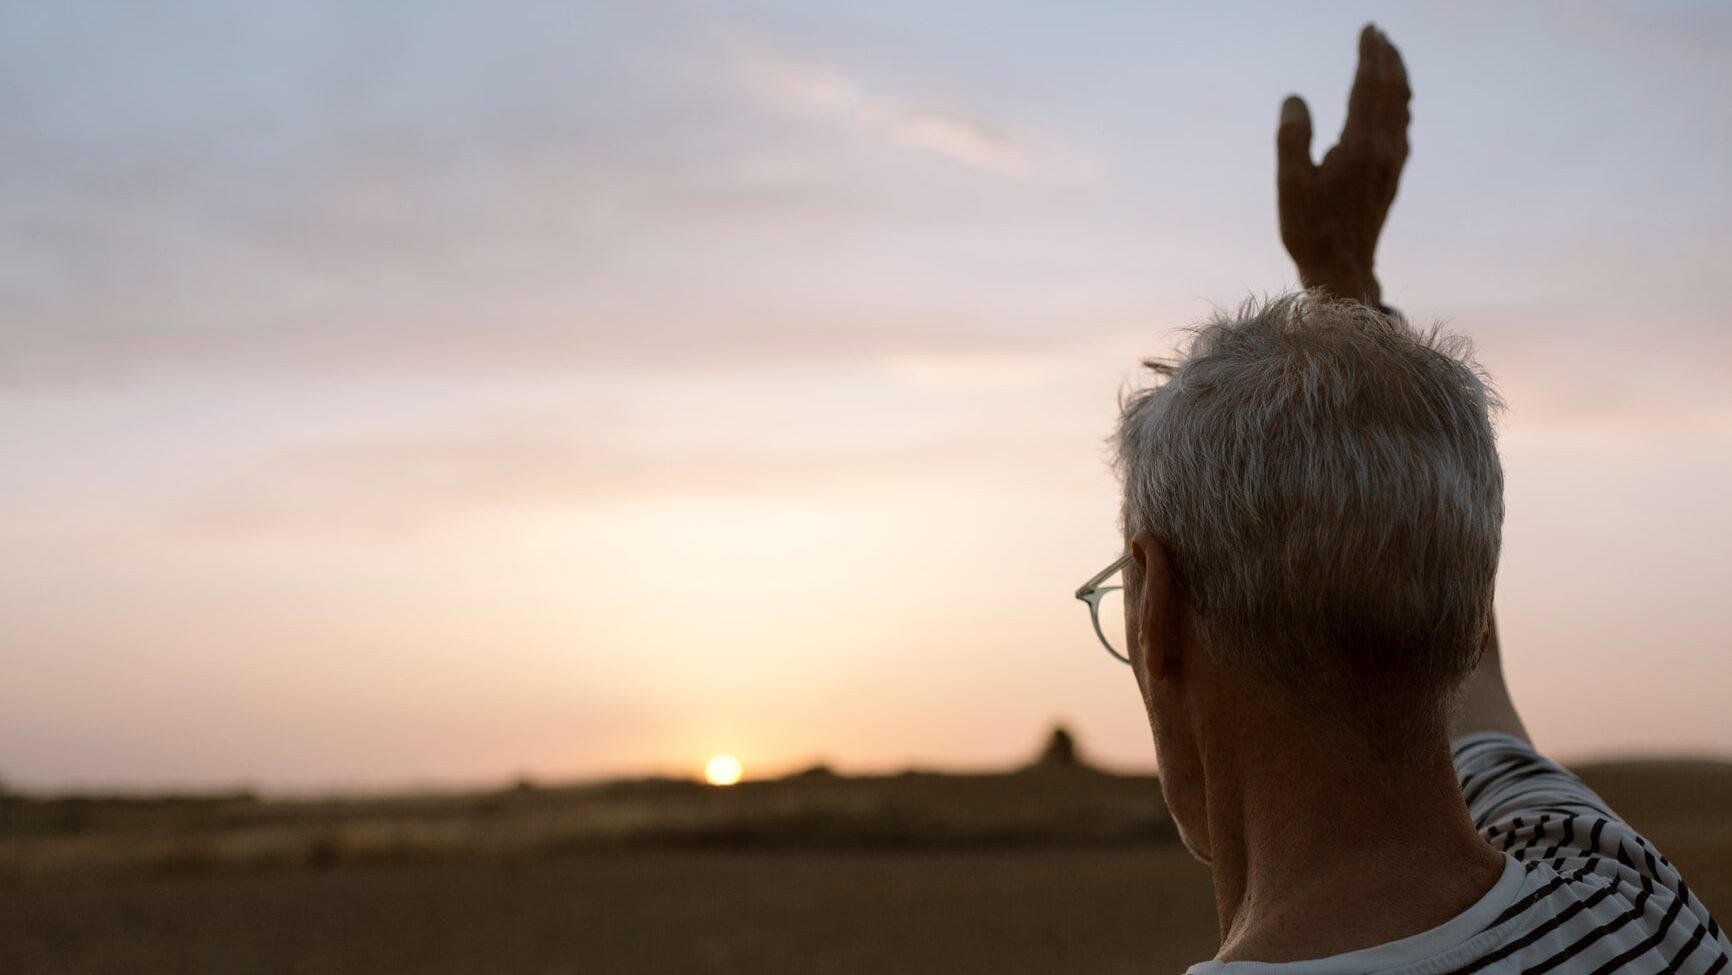 Senior grey-haired man wearing a striped t-shirt and using glasses waving at sun at sunset in the countryside